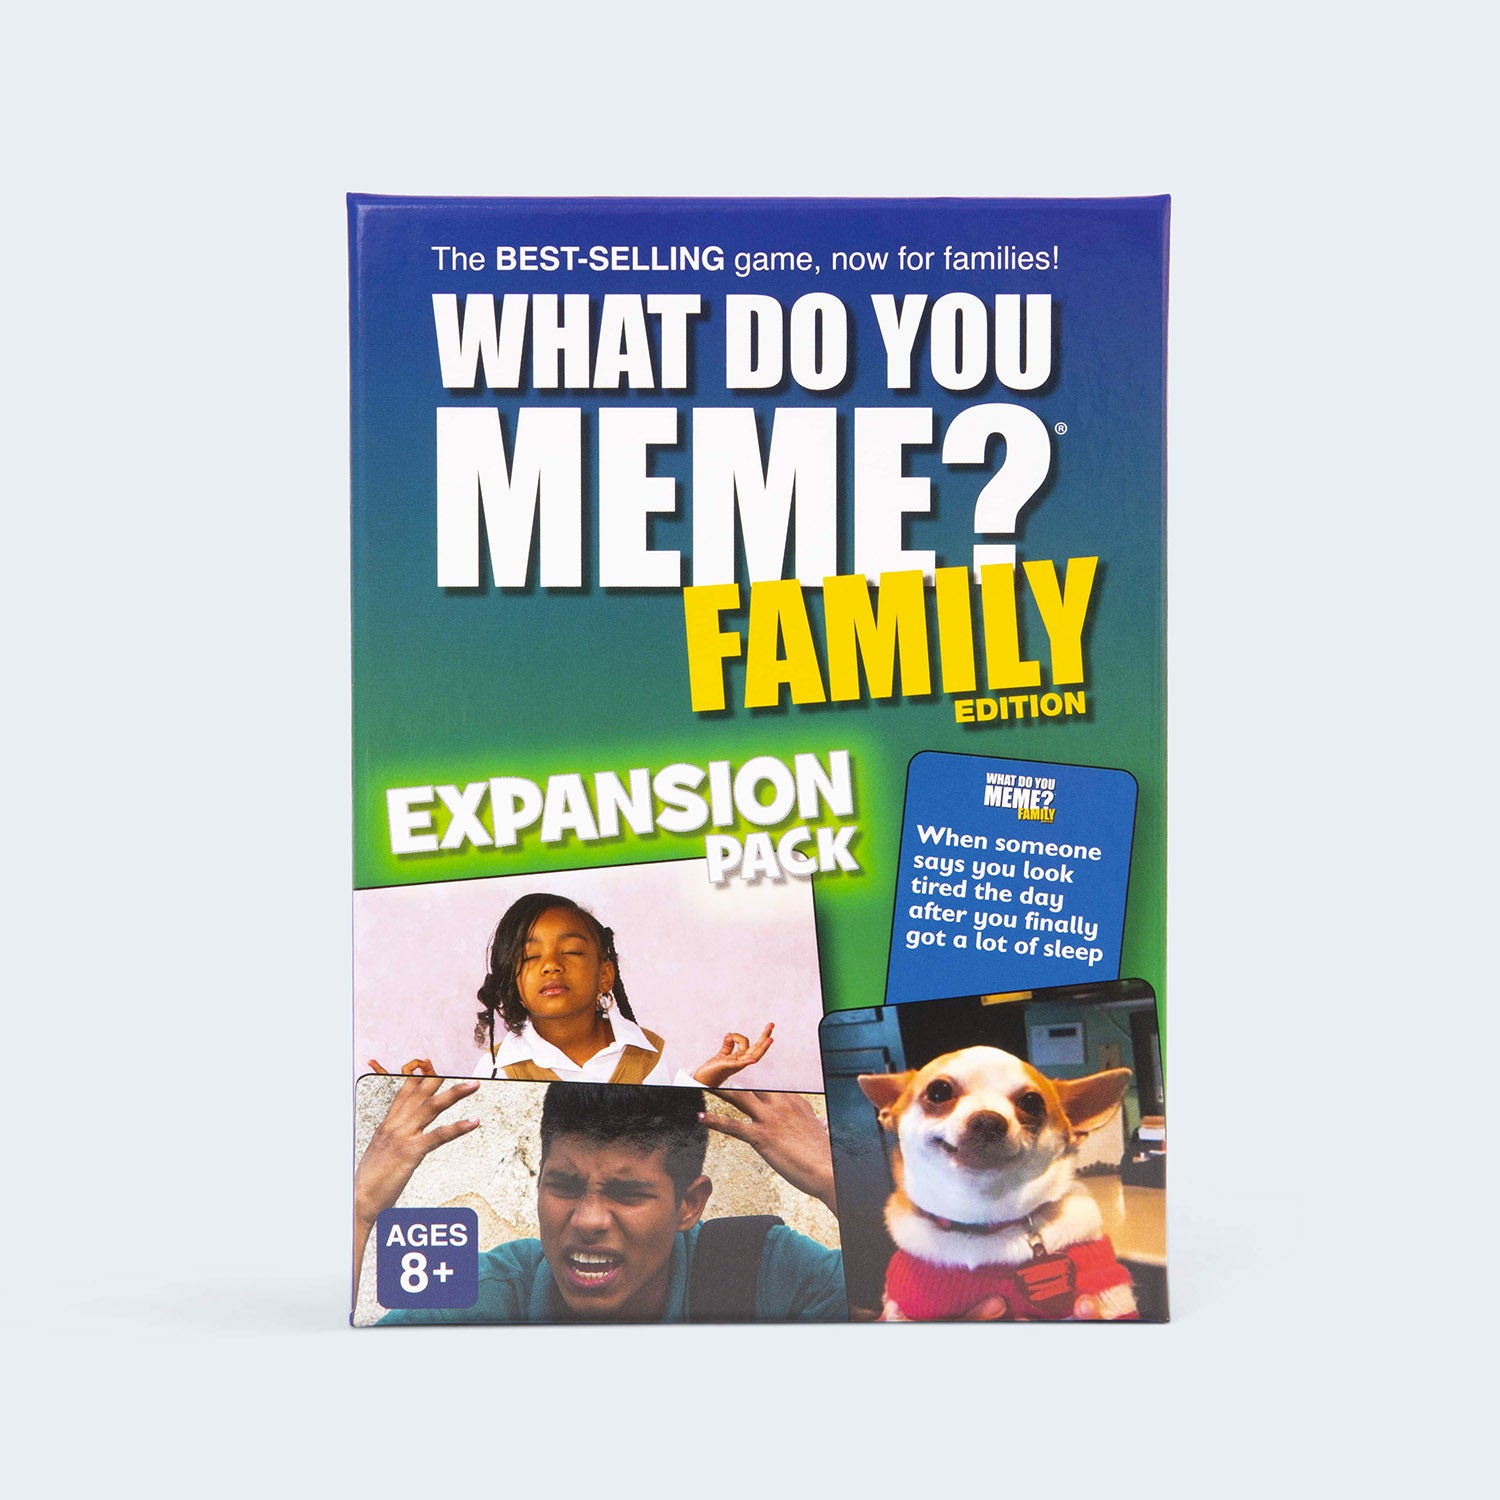 what-do-you-meme-family-edition-expansion-pack-game-box-and-game-play-04-what-do-you-meme-by-relatable